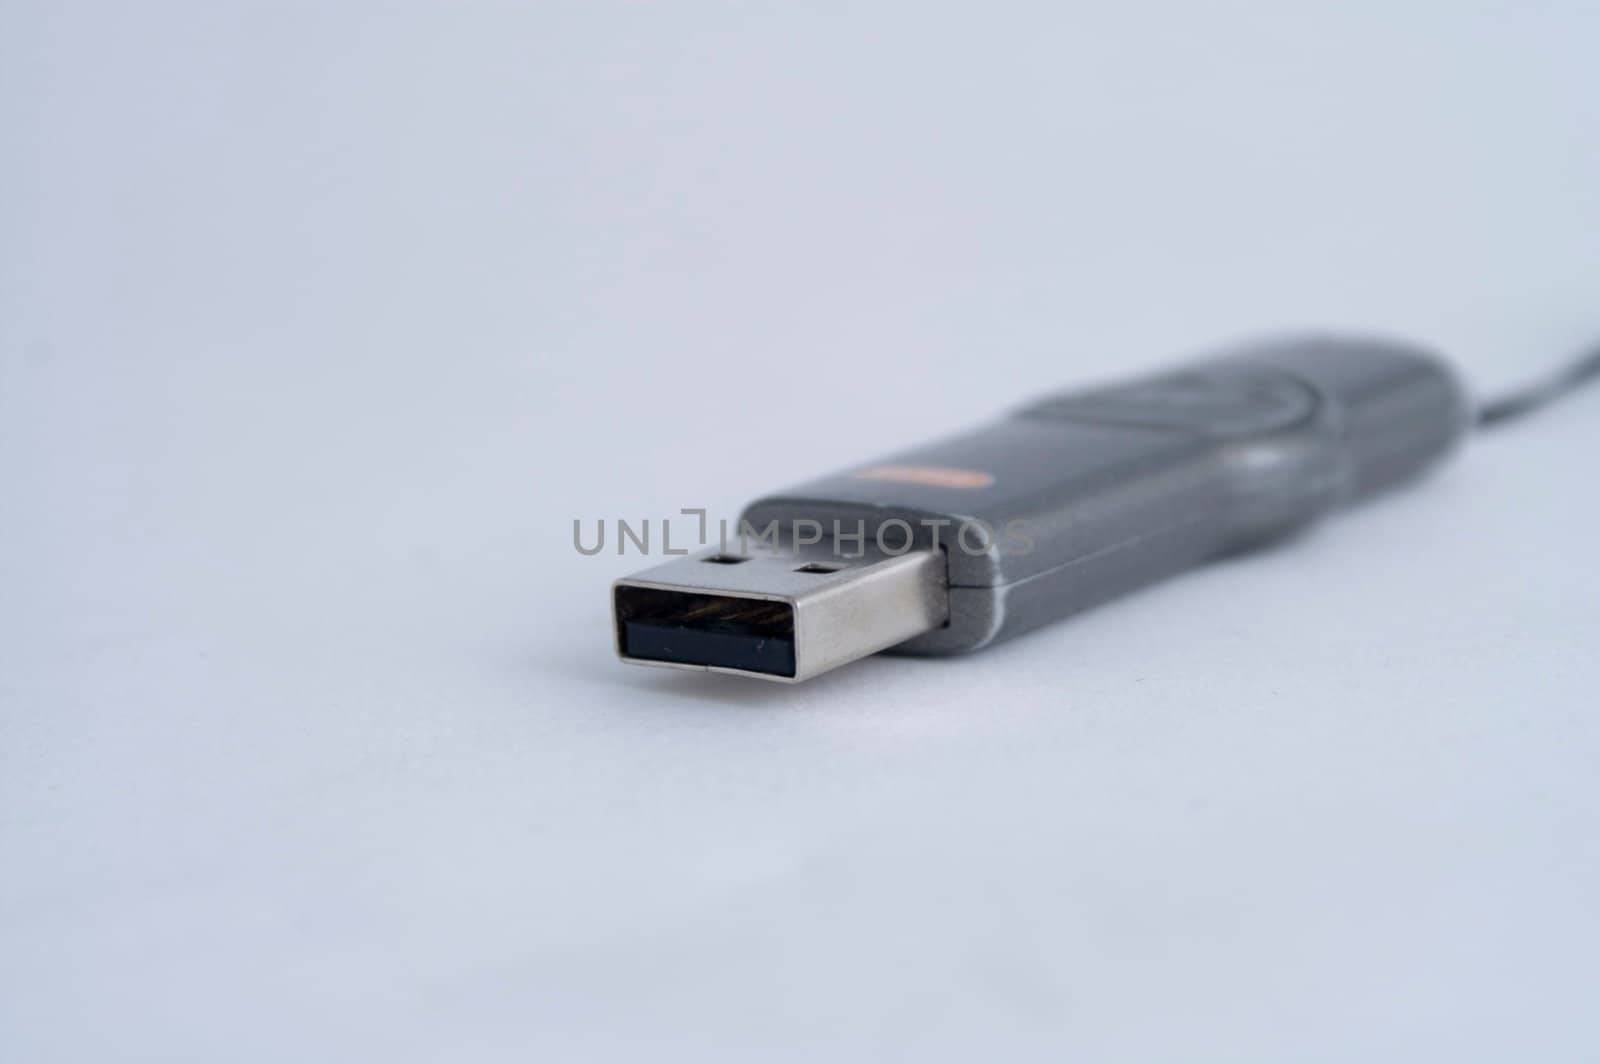 usb memory on a white backgroud